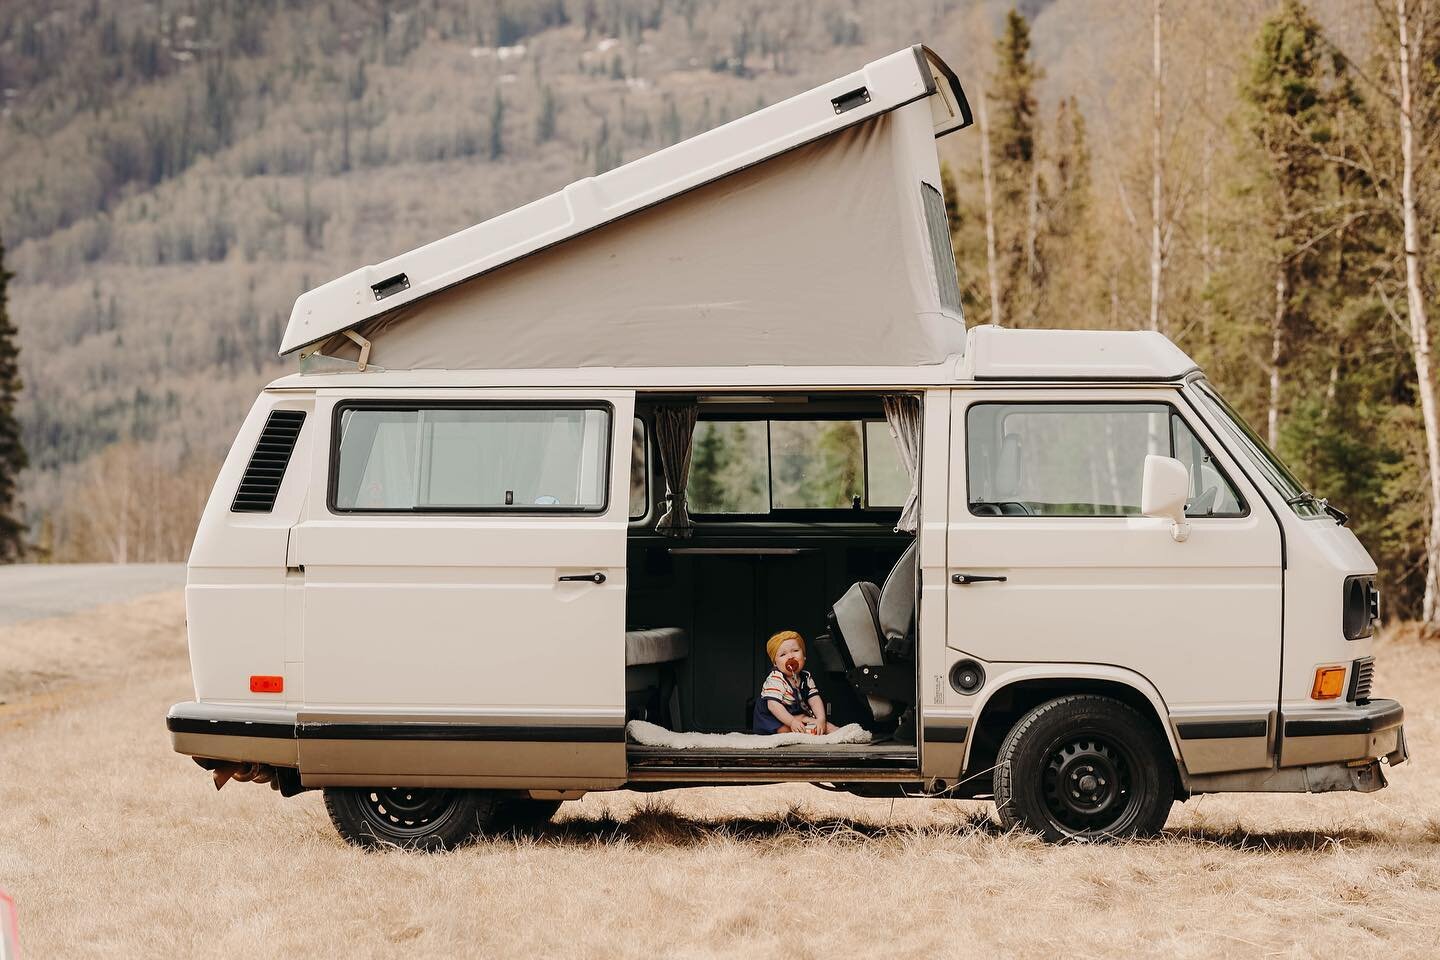 We love that so many of our renters this season have brought littles along for the adventure. We&rsquo;ve found that kids love Westys.. especially taking turns sleeping in the top bunk ☺️
📸: @colleenwallace_ 
🚌: Sourdough 

&bull;

&bull;

&bull;

